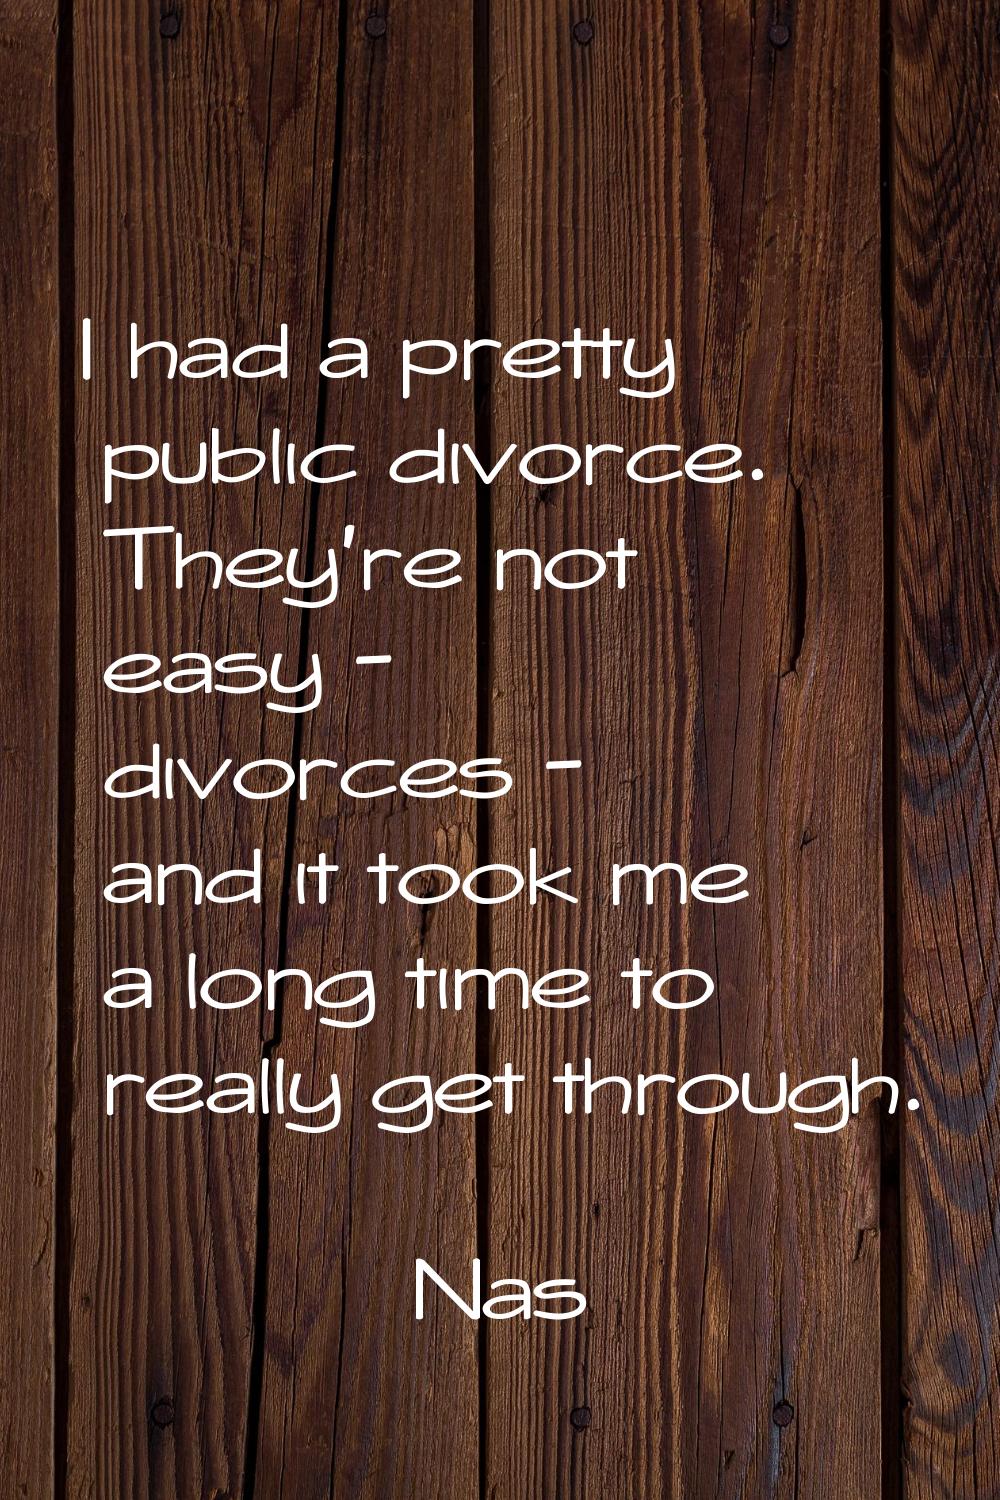 I had a pretty public divorce. They're not easy - divorces - and it took me a long time to really g